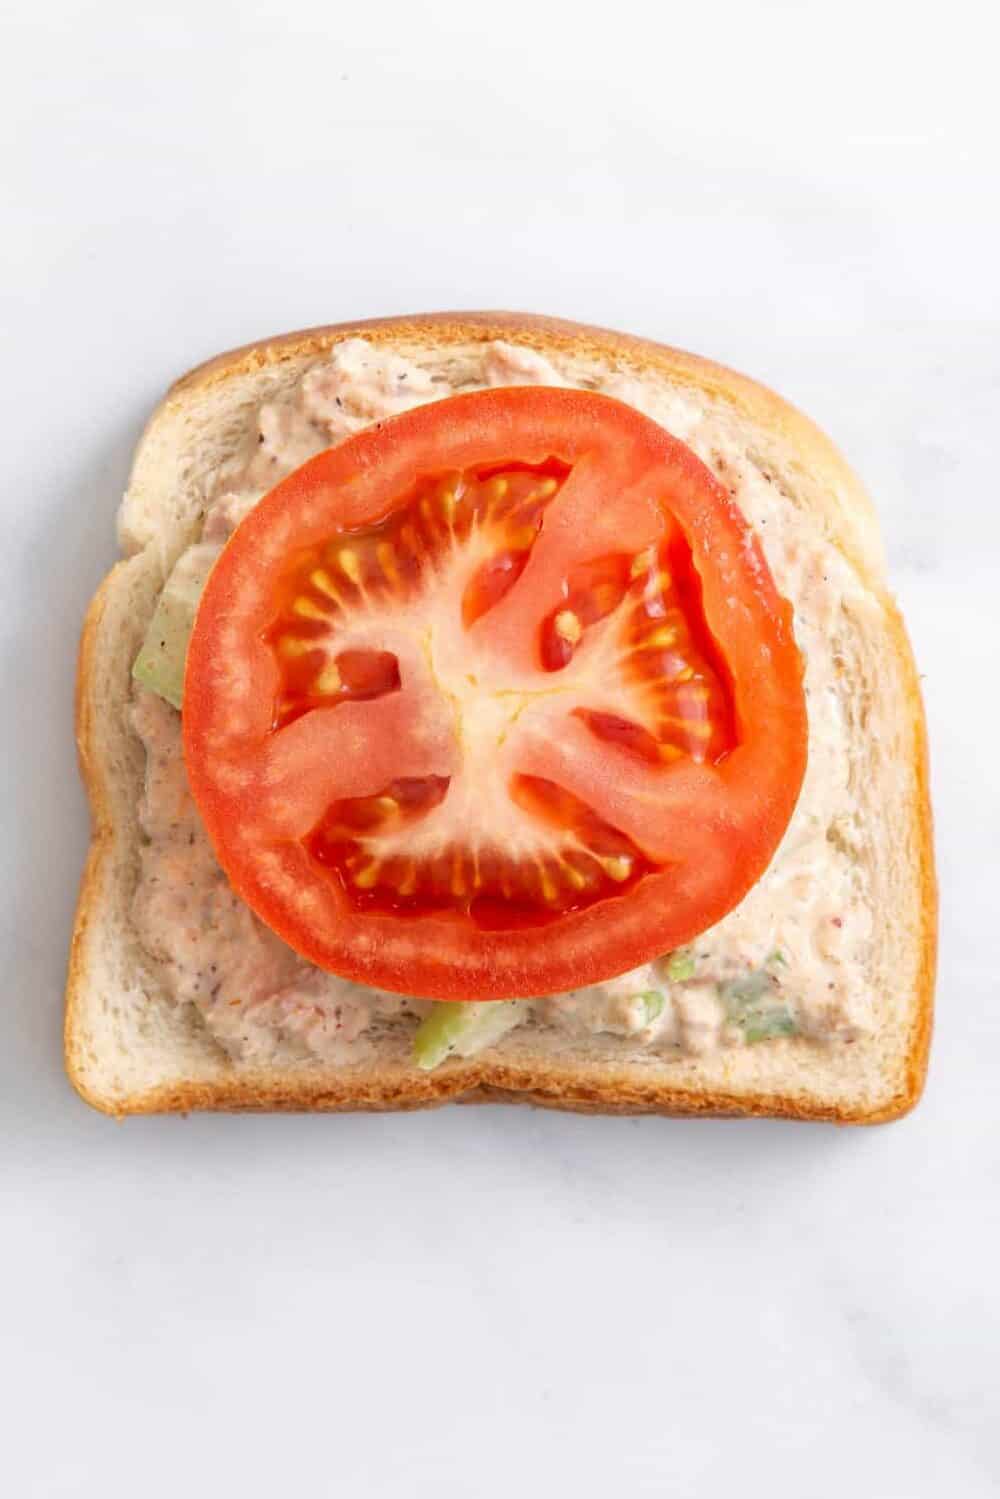 step 2 to make a tuna melt sandwich, place sliced tomatoes on top of the tuna salad on bread